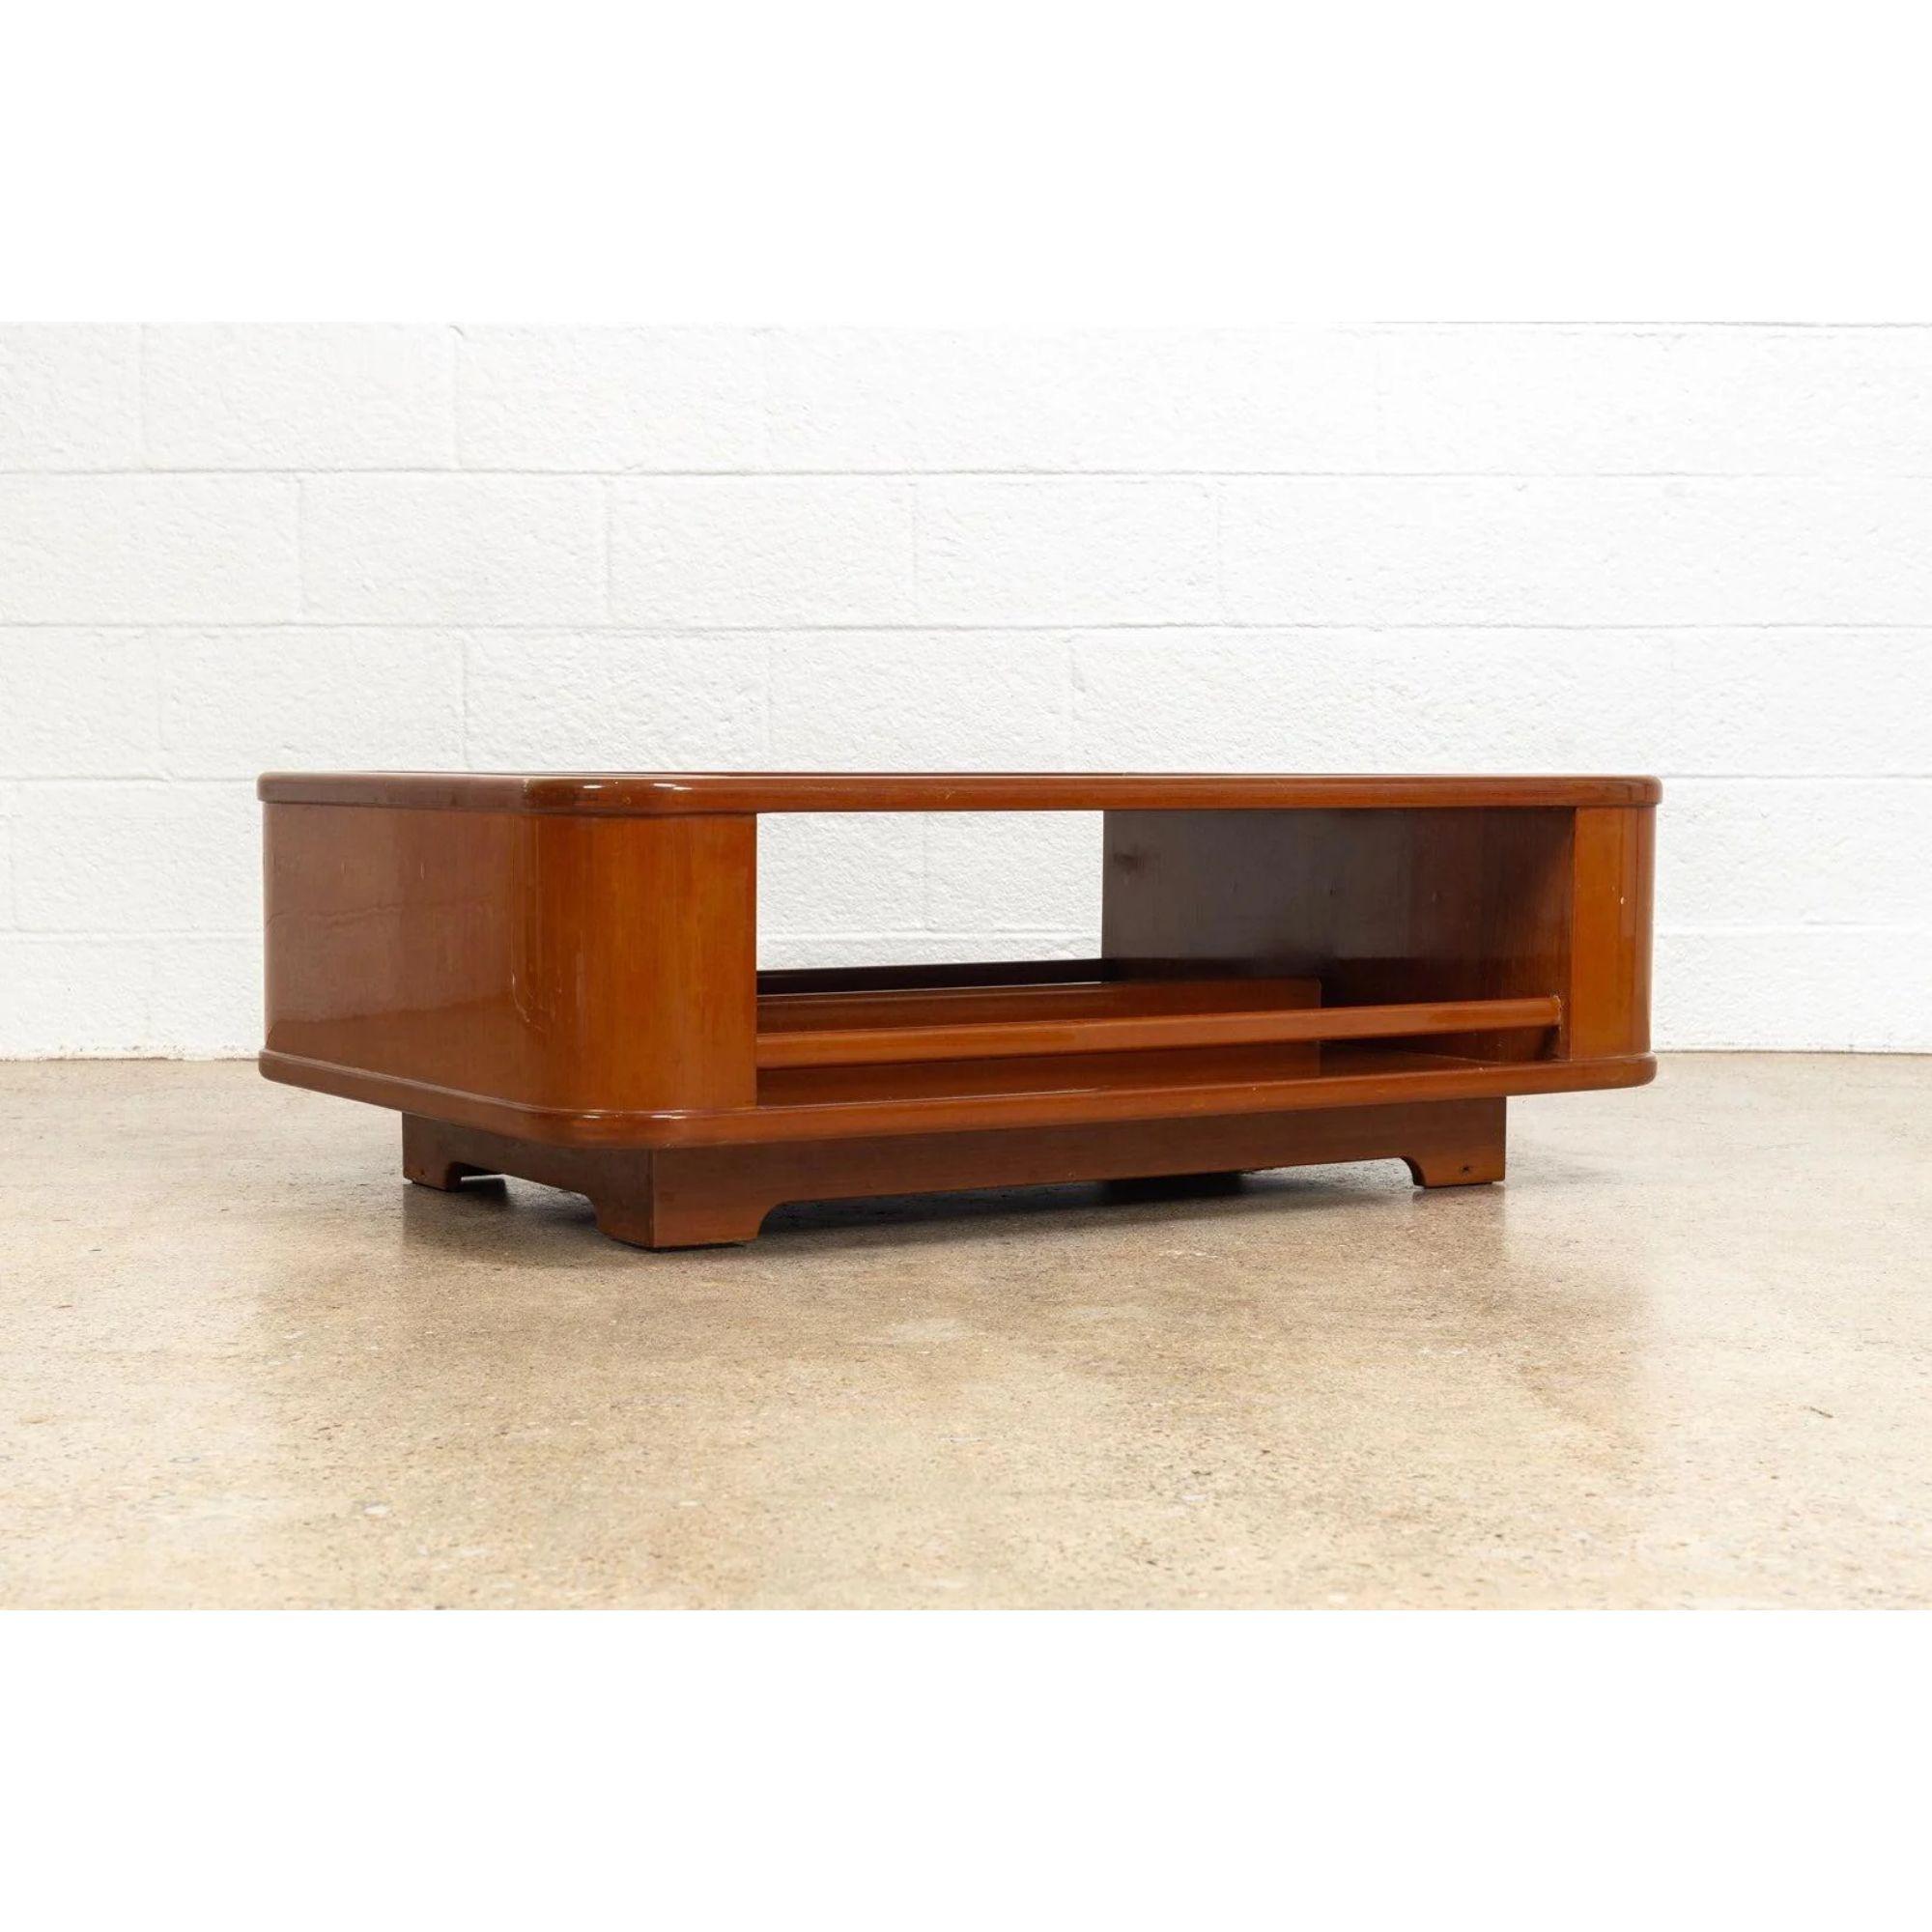 Late 20th Century Mid-Century Modern Coffee Table in Lacquered Wood, 1970s